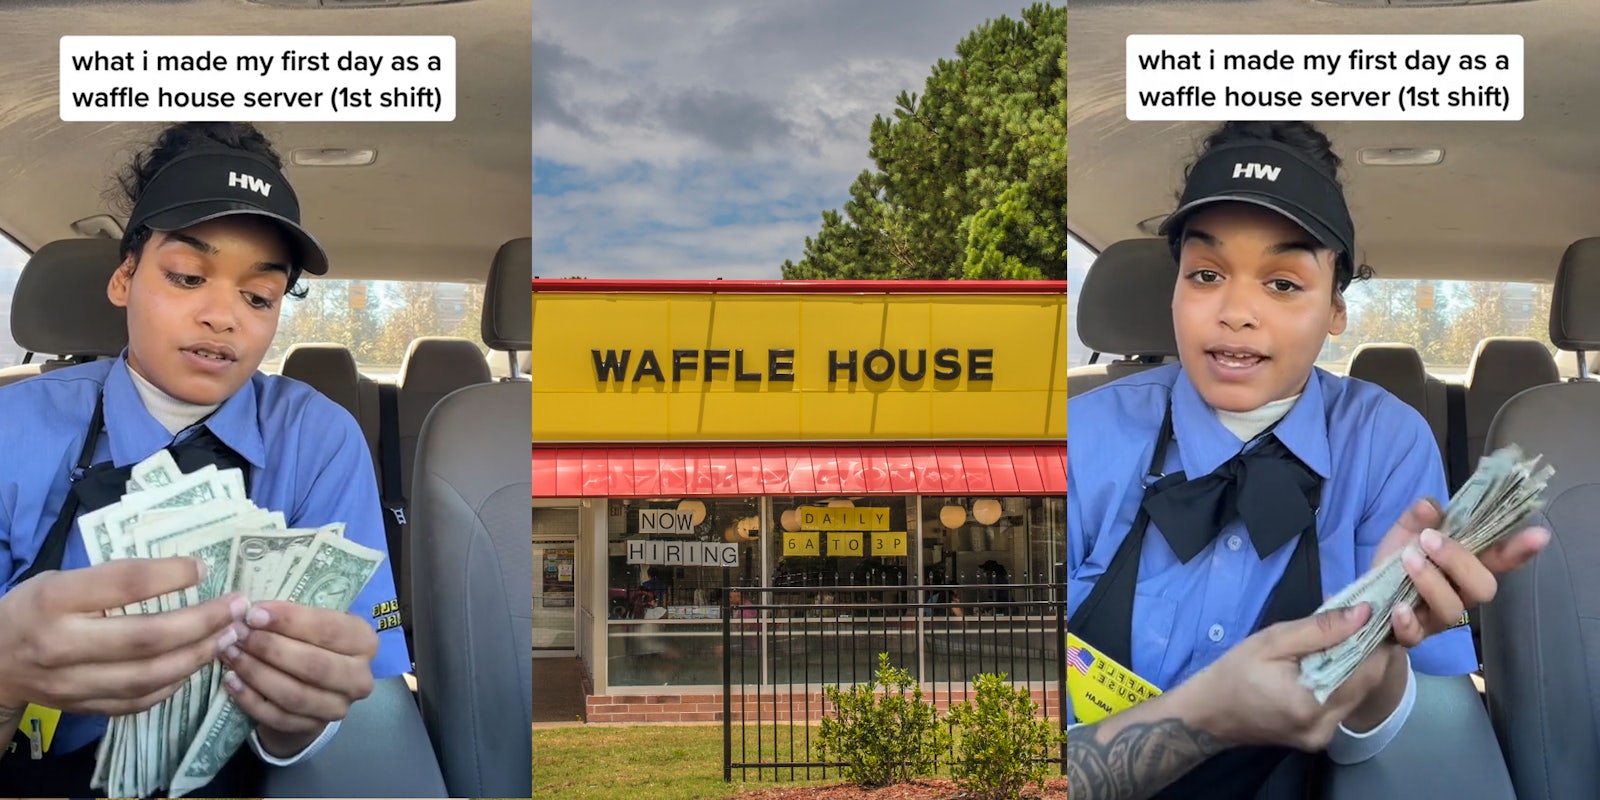 Waffle House server speaking in car holding cash with caption 'what i made my first day as a waffle house server (1st shift) (l) Waffle House building with sign (c) Waffle House server speaking in car holding cash with caption 'what i made my first day as a waffle house server (1st shift) (r)